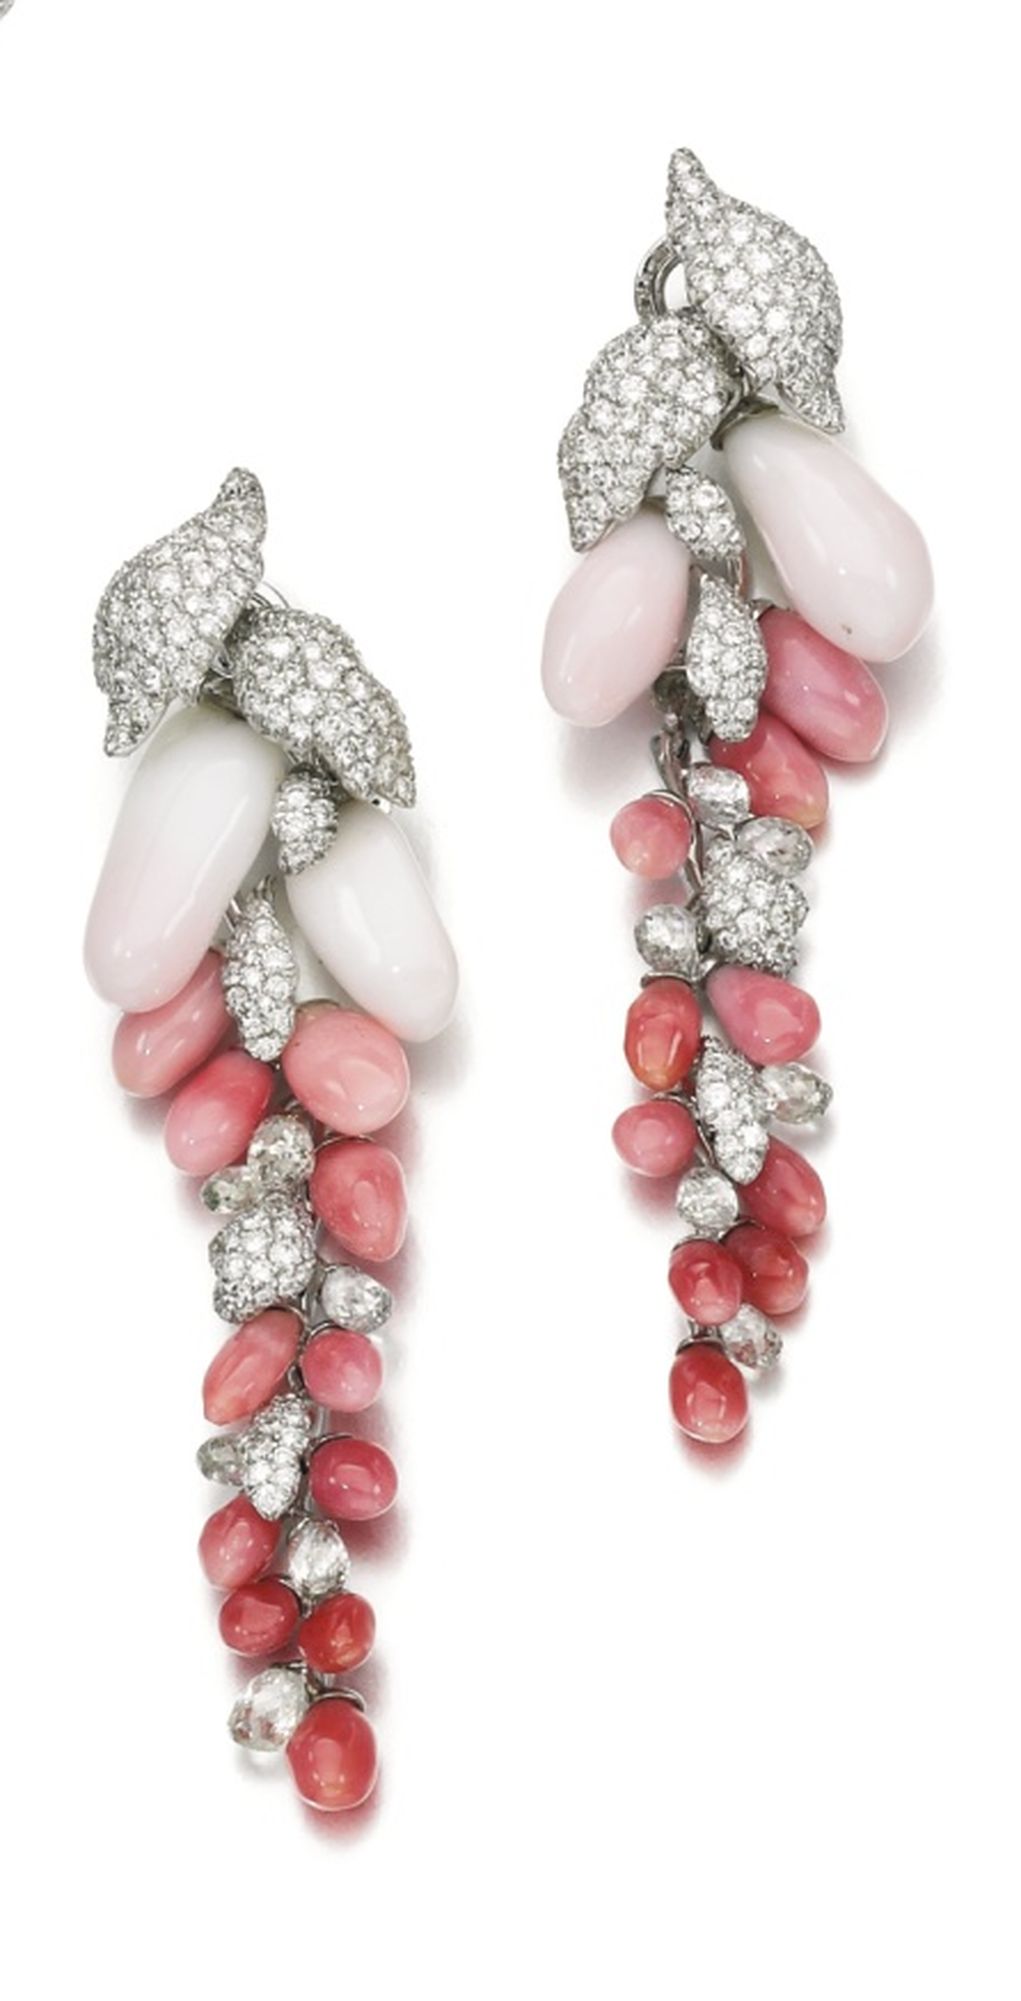 Lot 167 - Pair of Conch Pearl and Diamond Earrings of the Demi-Parure